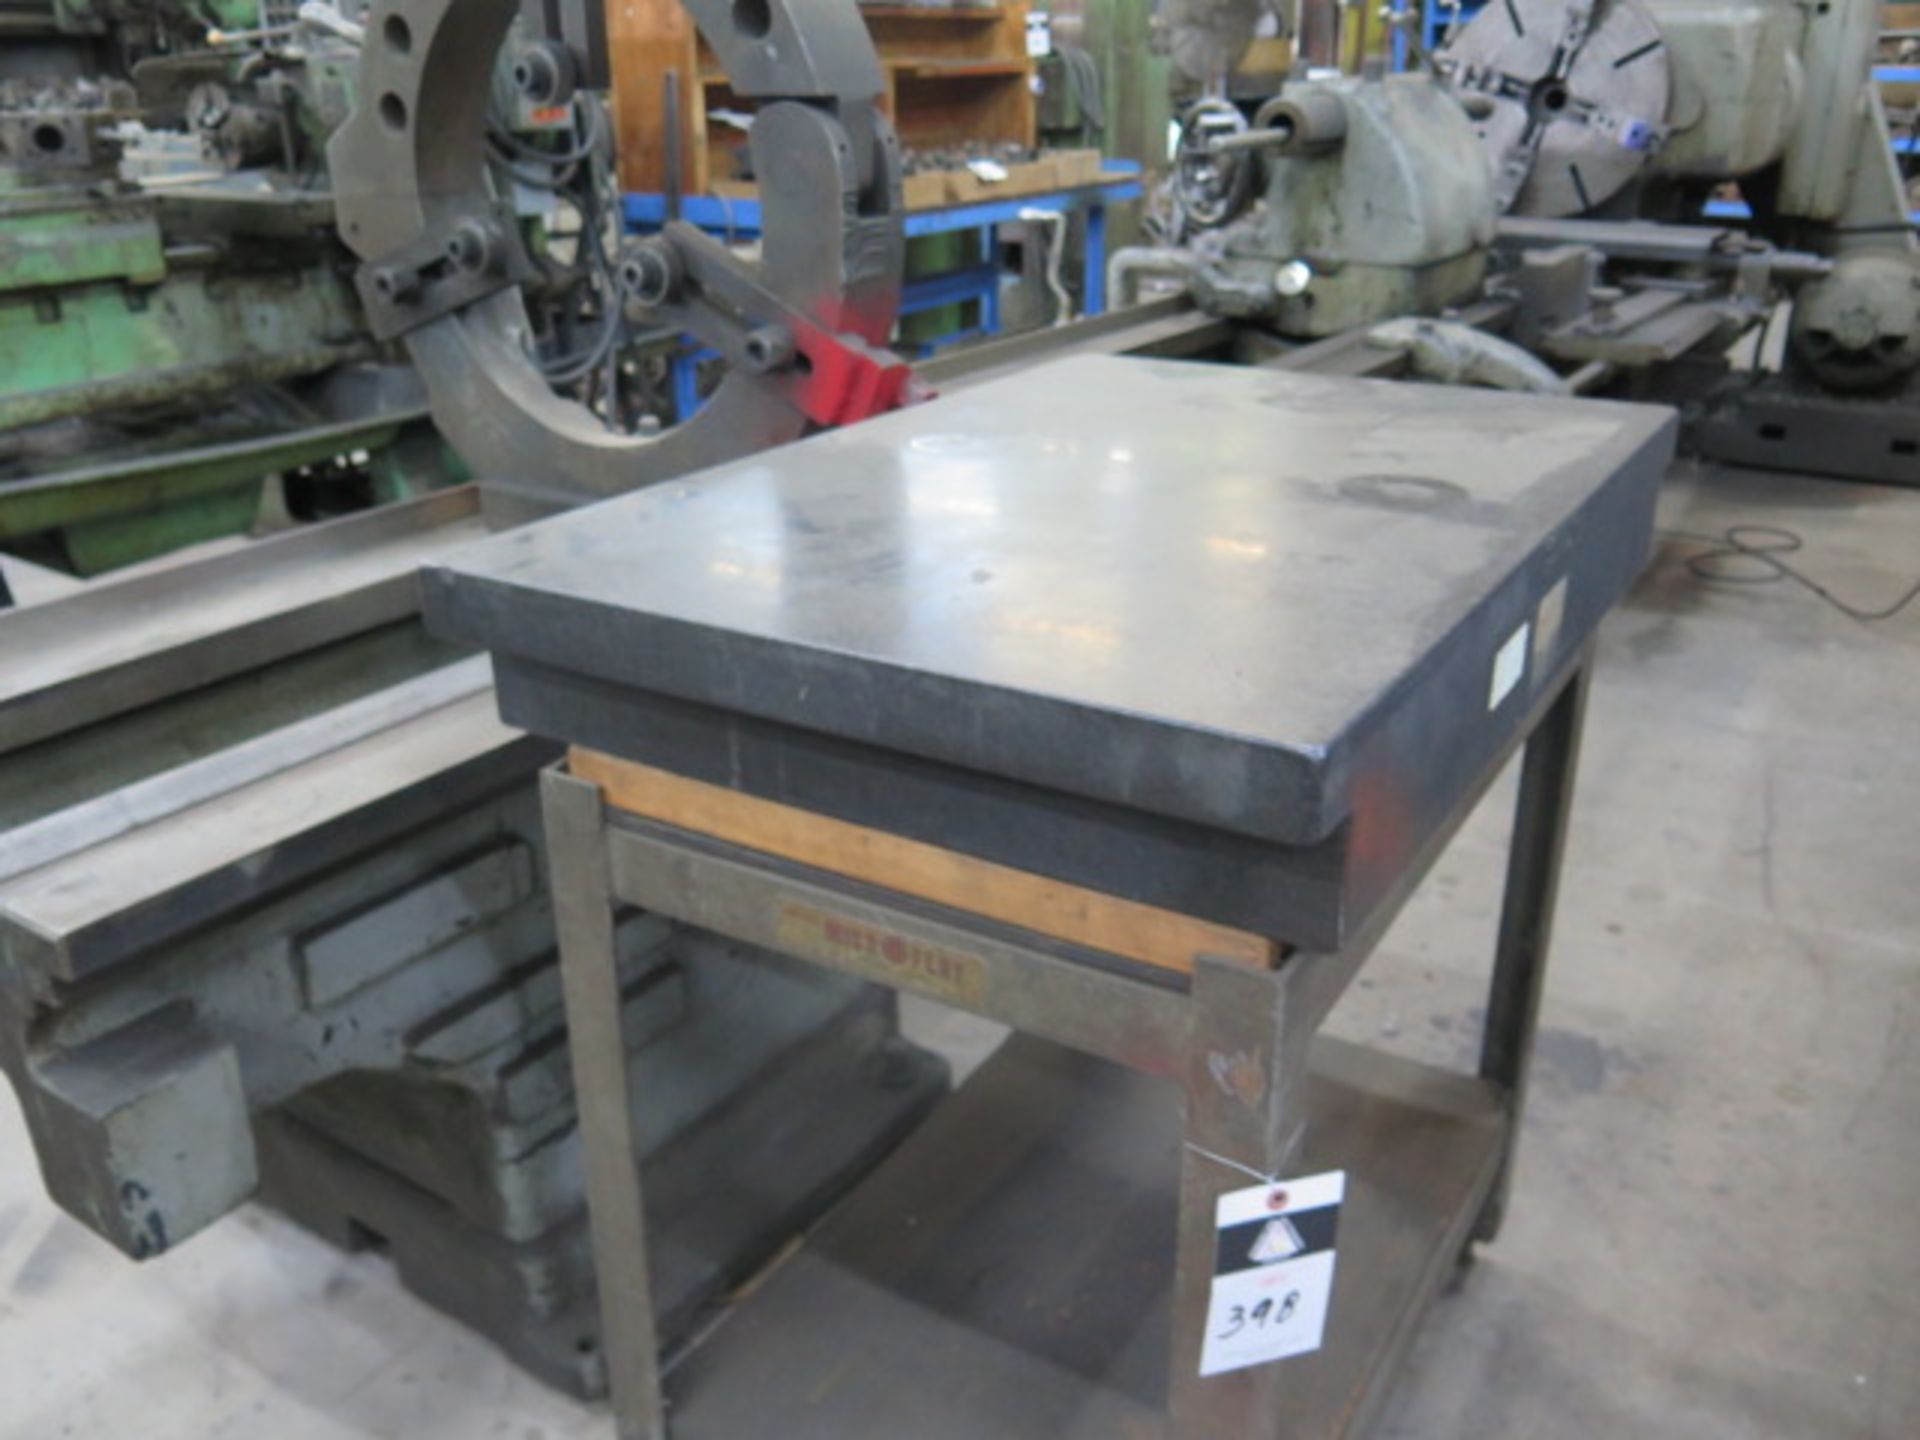 24” x 36” x 5 ½” 2-Ledge Granite Surface Plate w/ Stand (SOLD AS-IS - NO WARRANTY) - Image 2 of 4